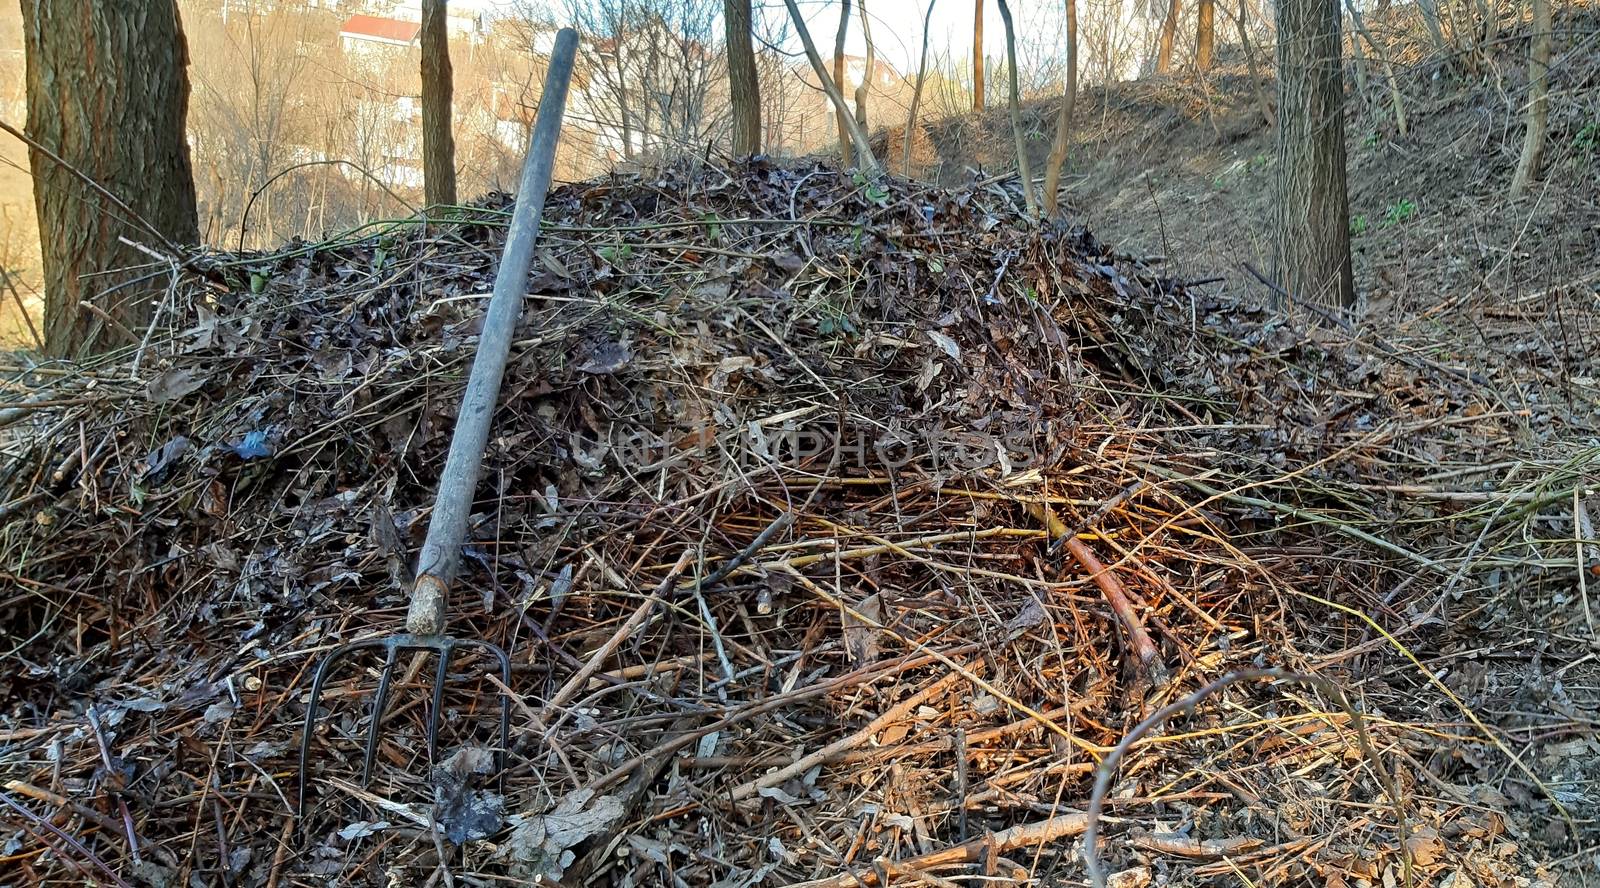 Leaves and branches for use in compost by Mindru